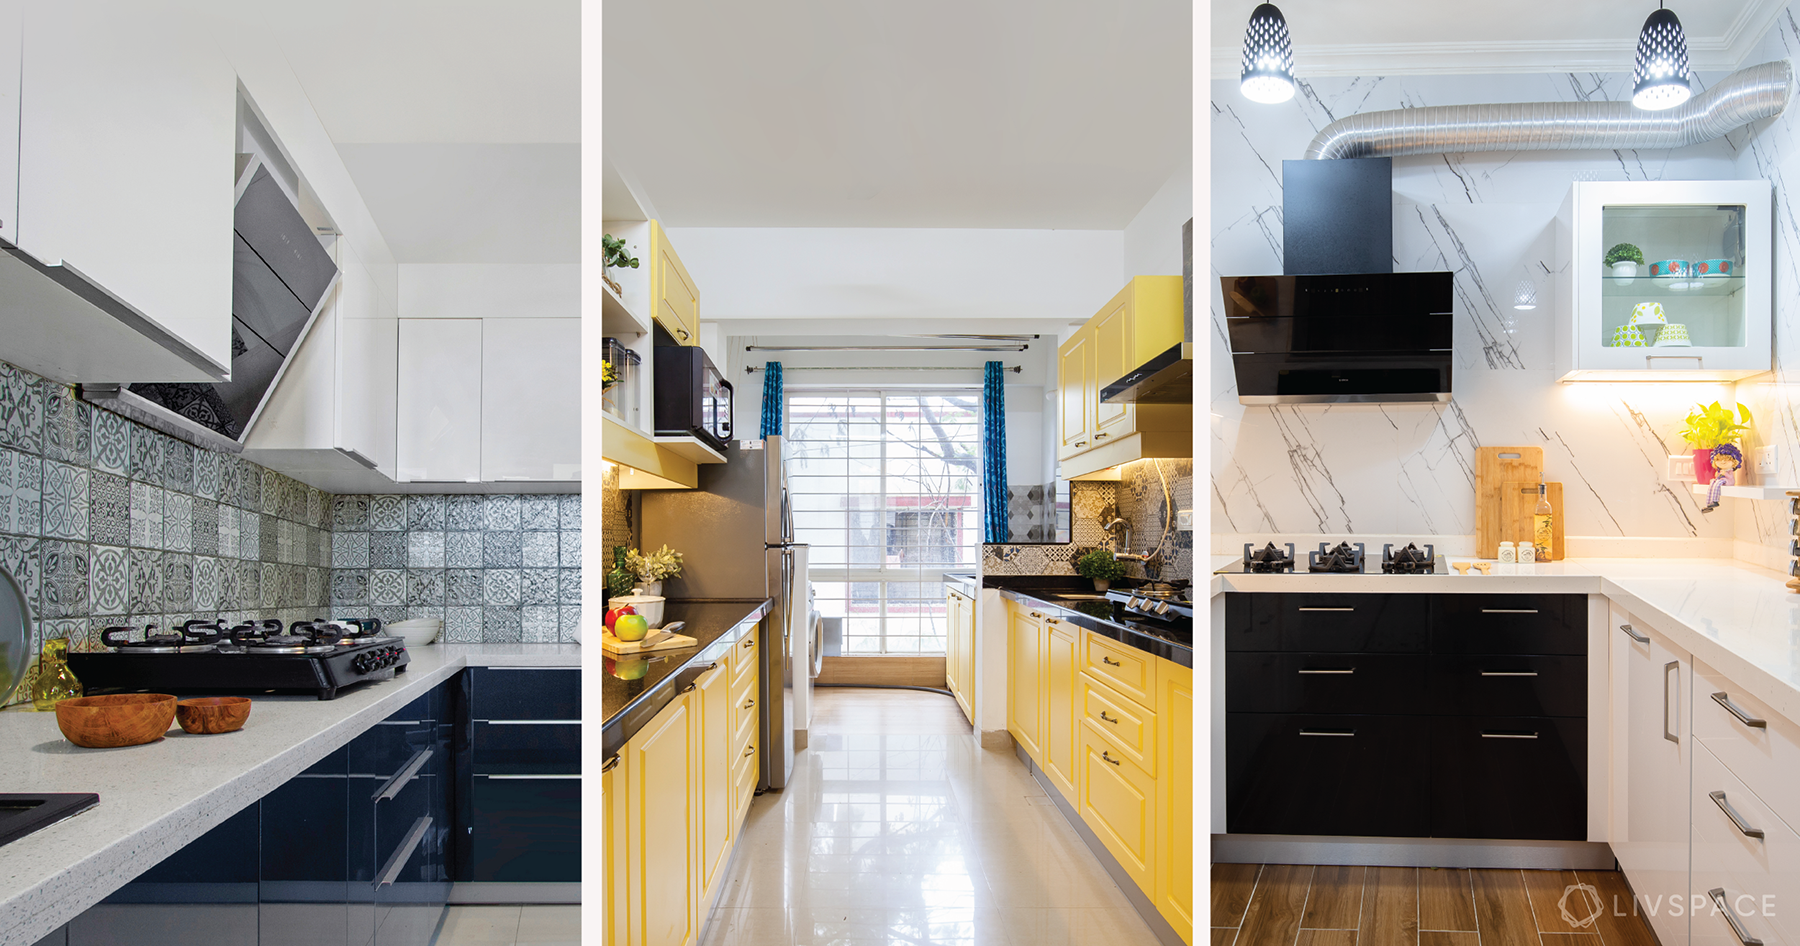 25 Small Kitchens Under 250 sq. ft. What Makes Them Amazing